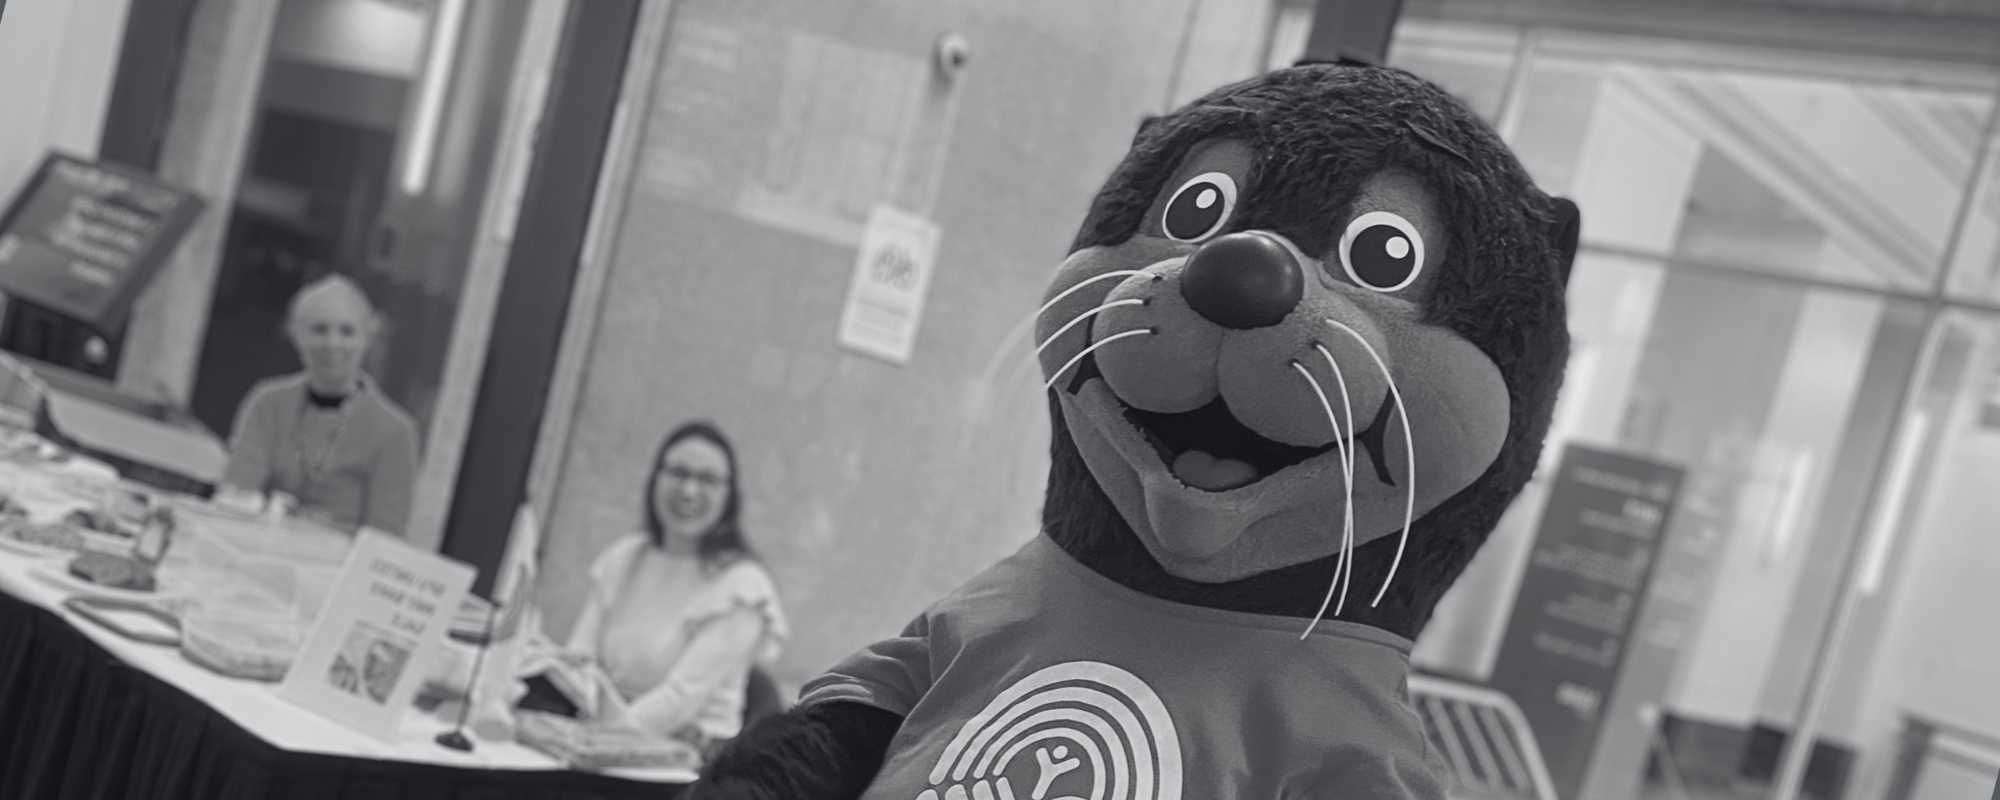 Seymour the Sea Otter Visits the Vancouver Book and Bake Sale